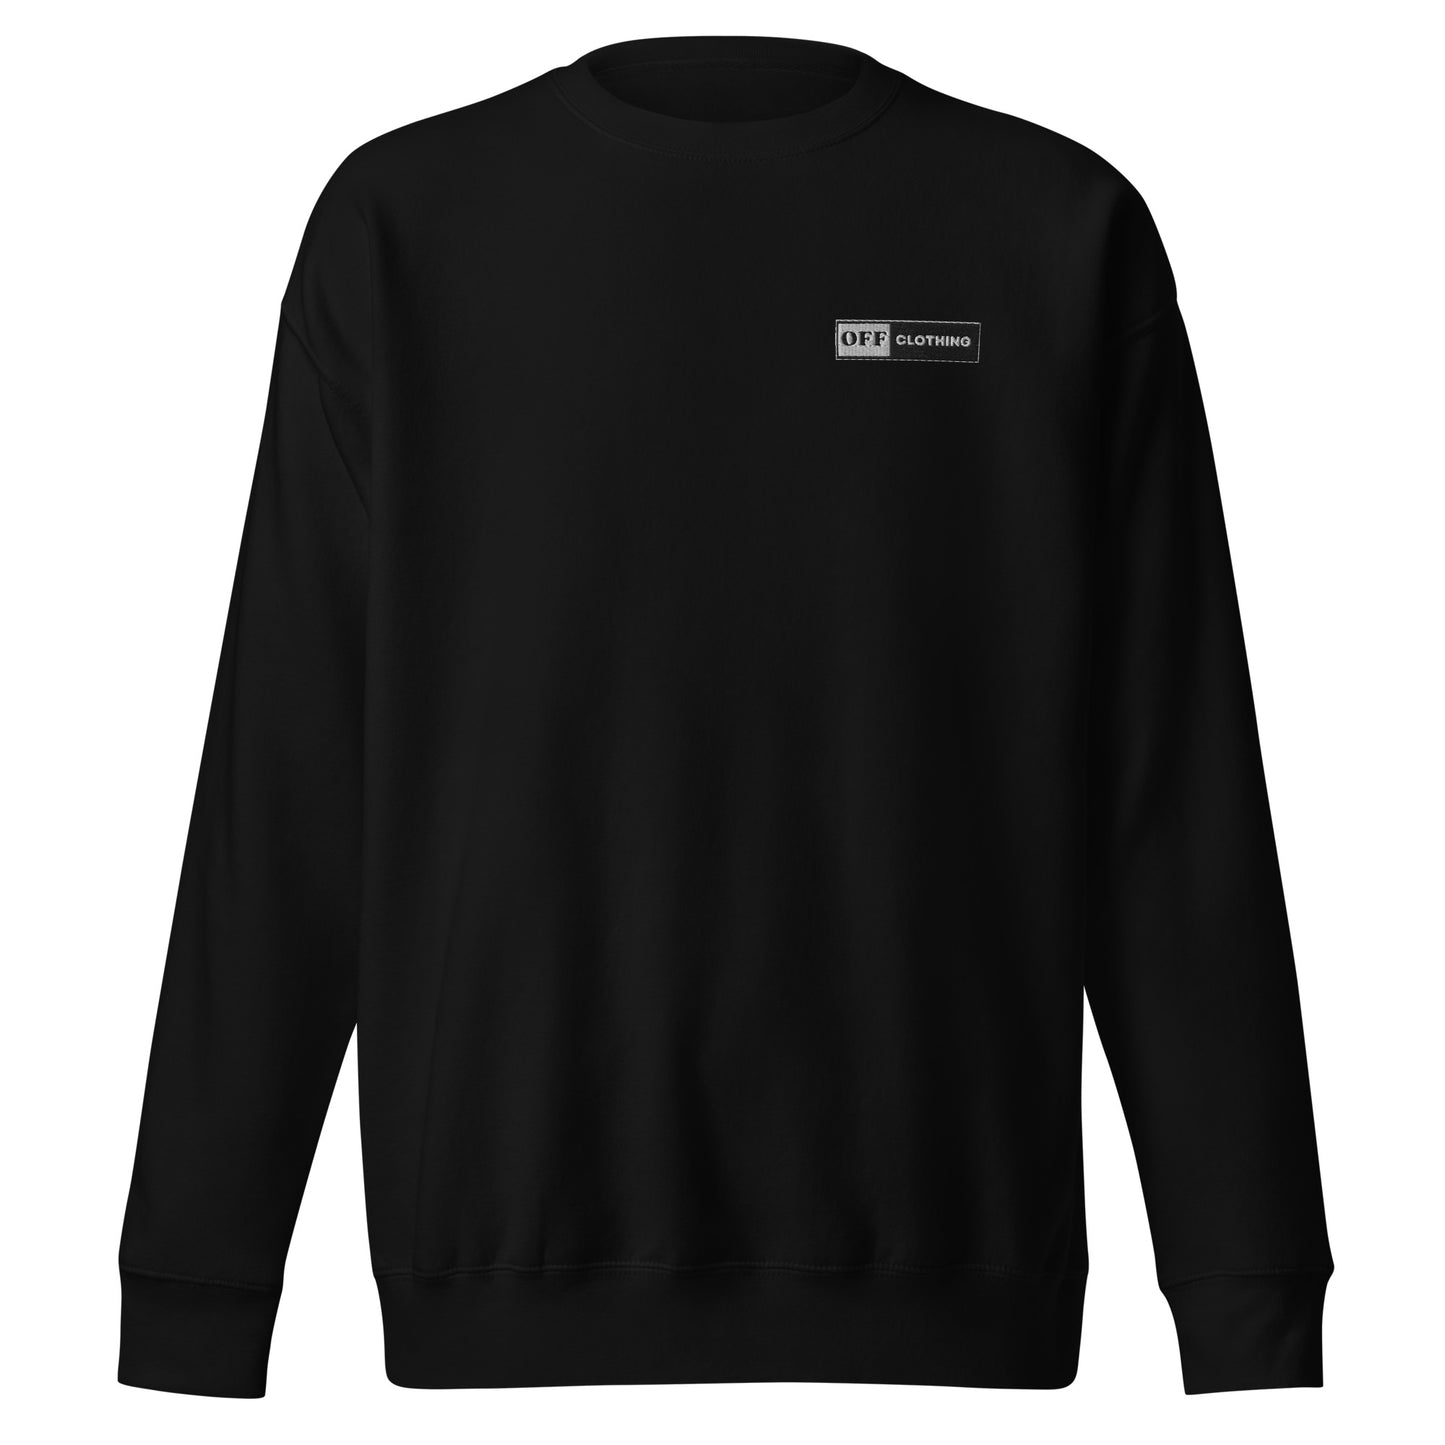 Not Just One Way Sweater Black